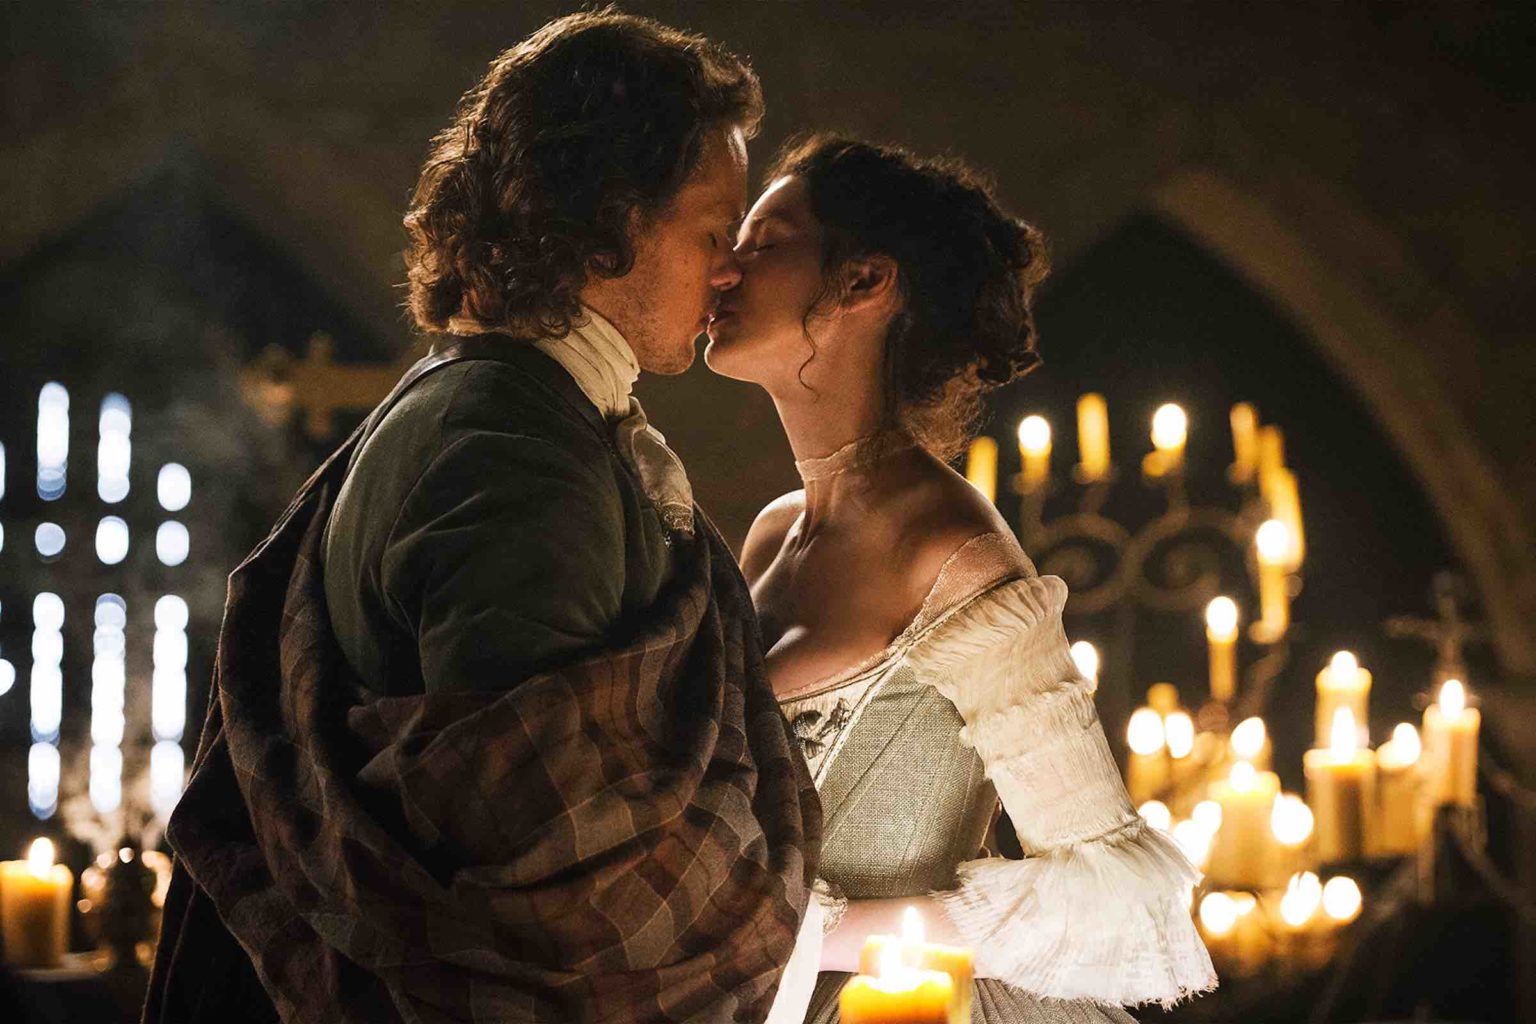 'Outlander'’s Jamie and Claire just might be TV’s most romantic couple. Let us count the reasons why they are our favorite ship.